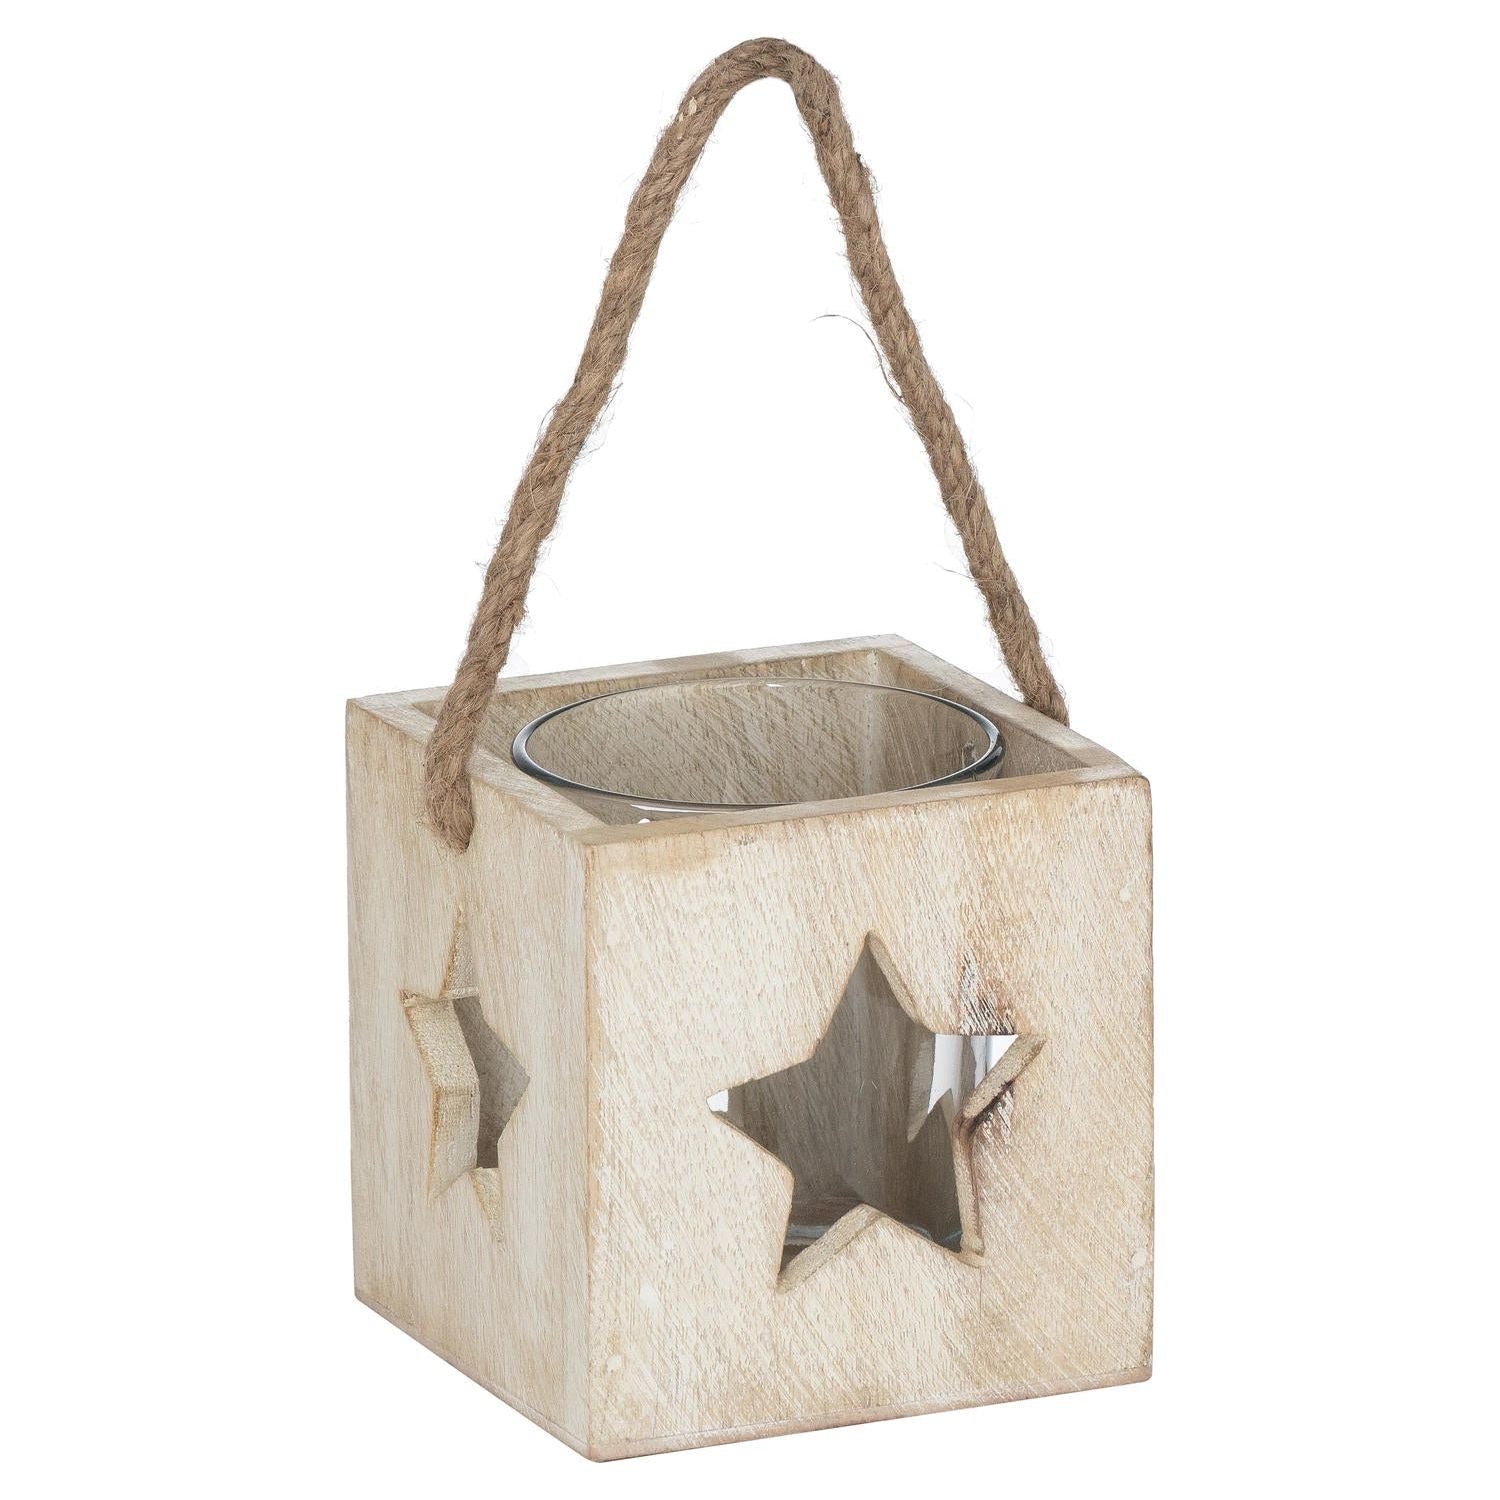 Washed Wood Star Tealight Candle Holder - Ashton and Finch